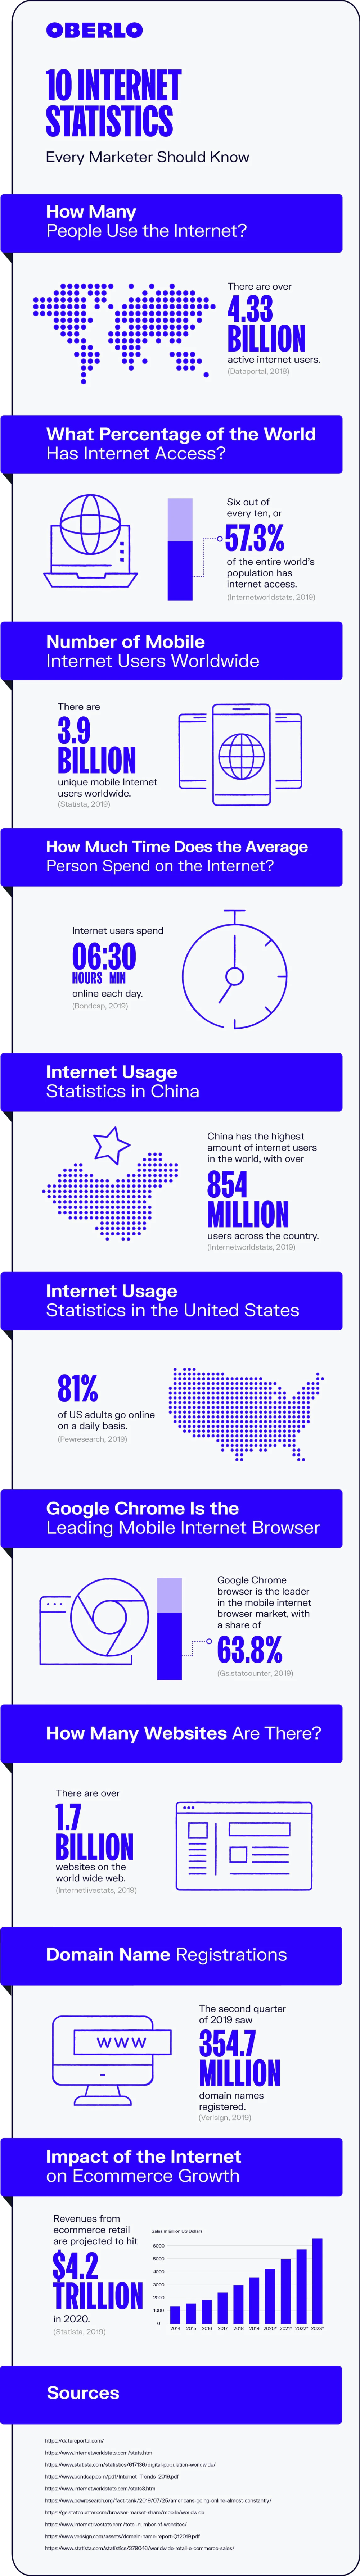 10 Internet Statistics Every Marketer Should Know in 2021 [Infographic]